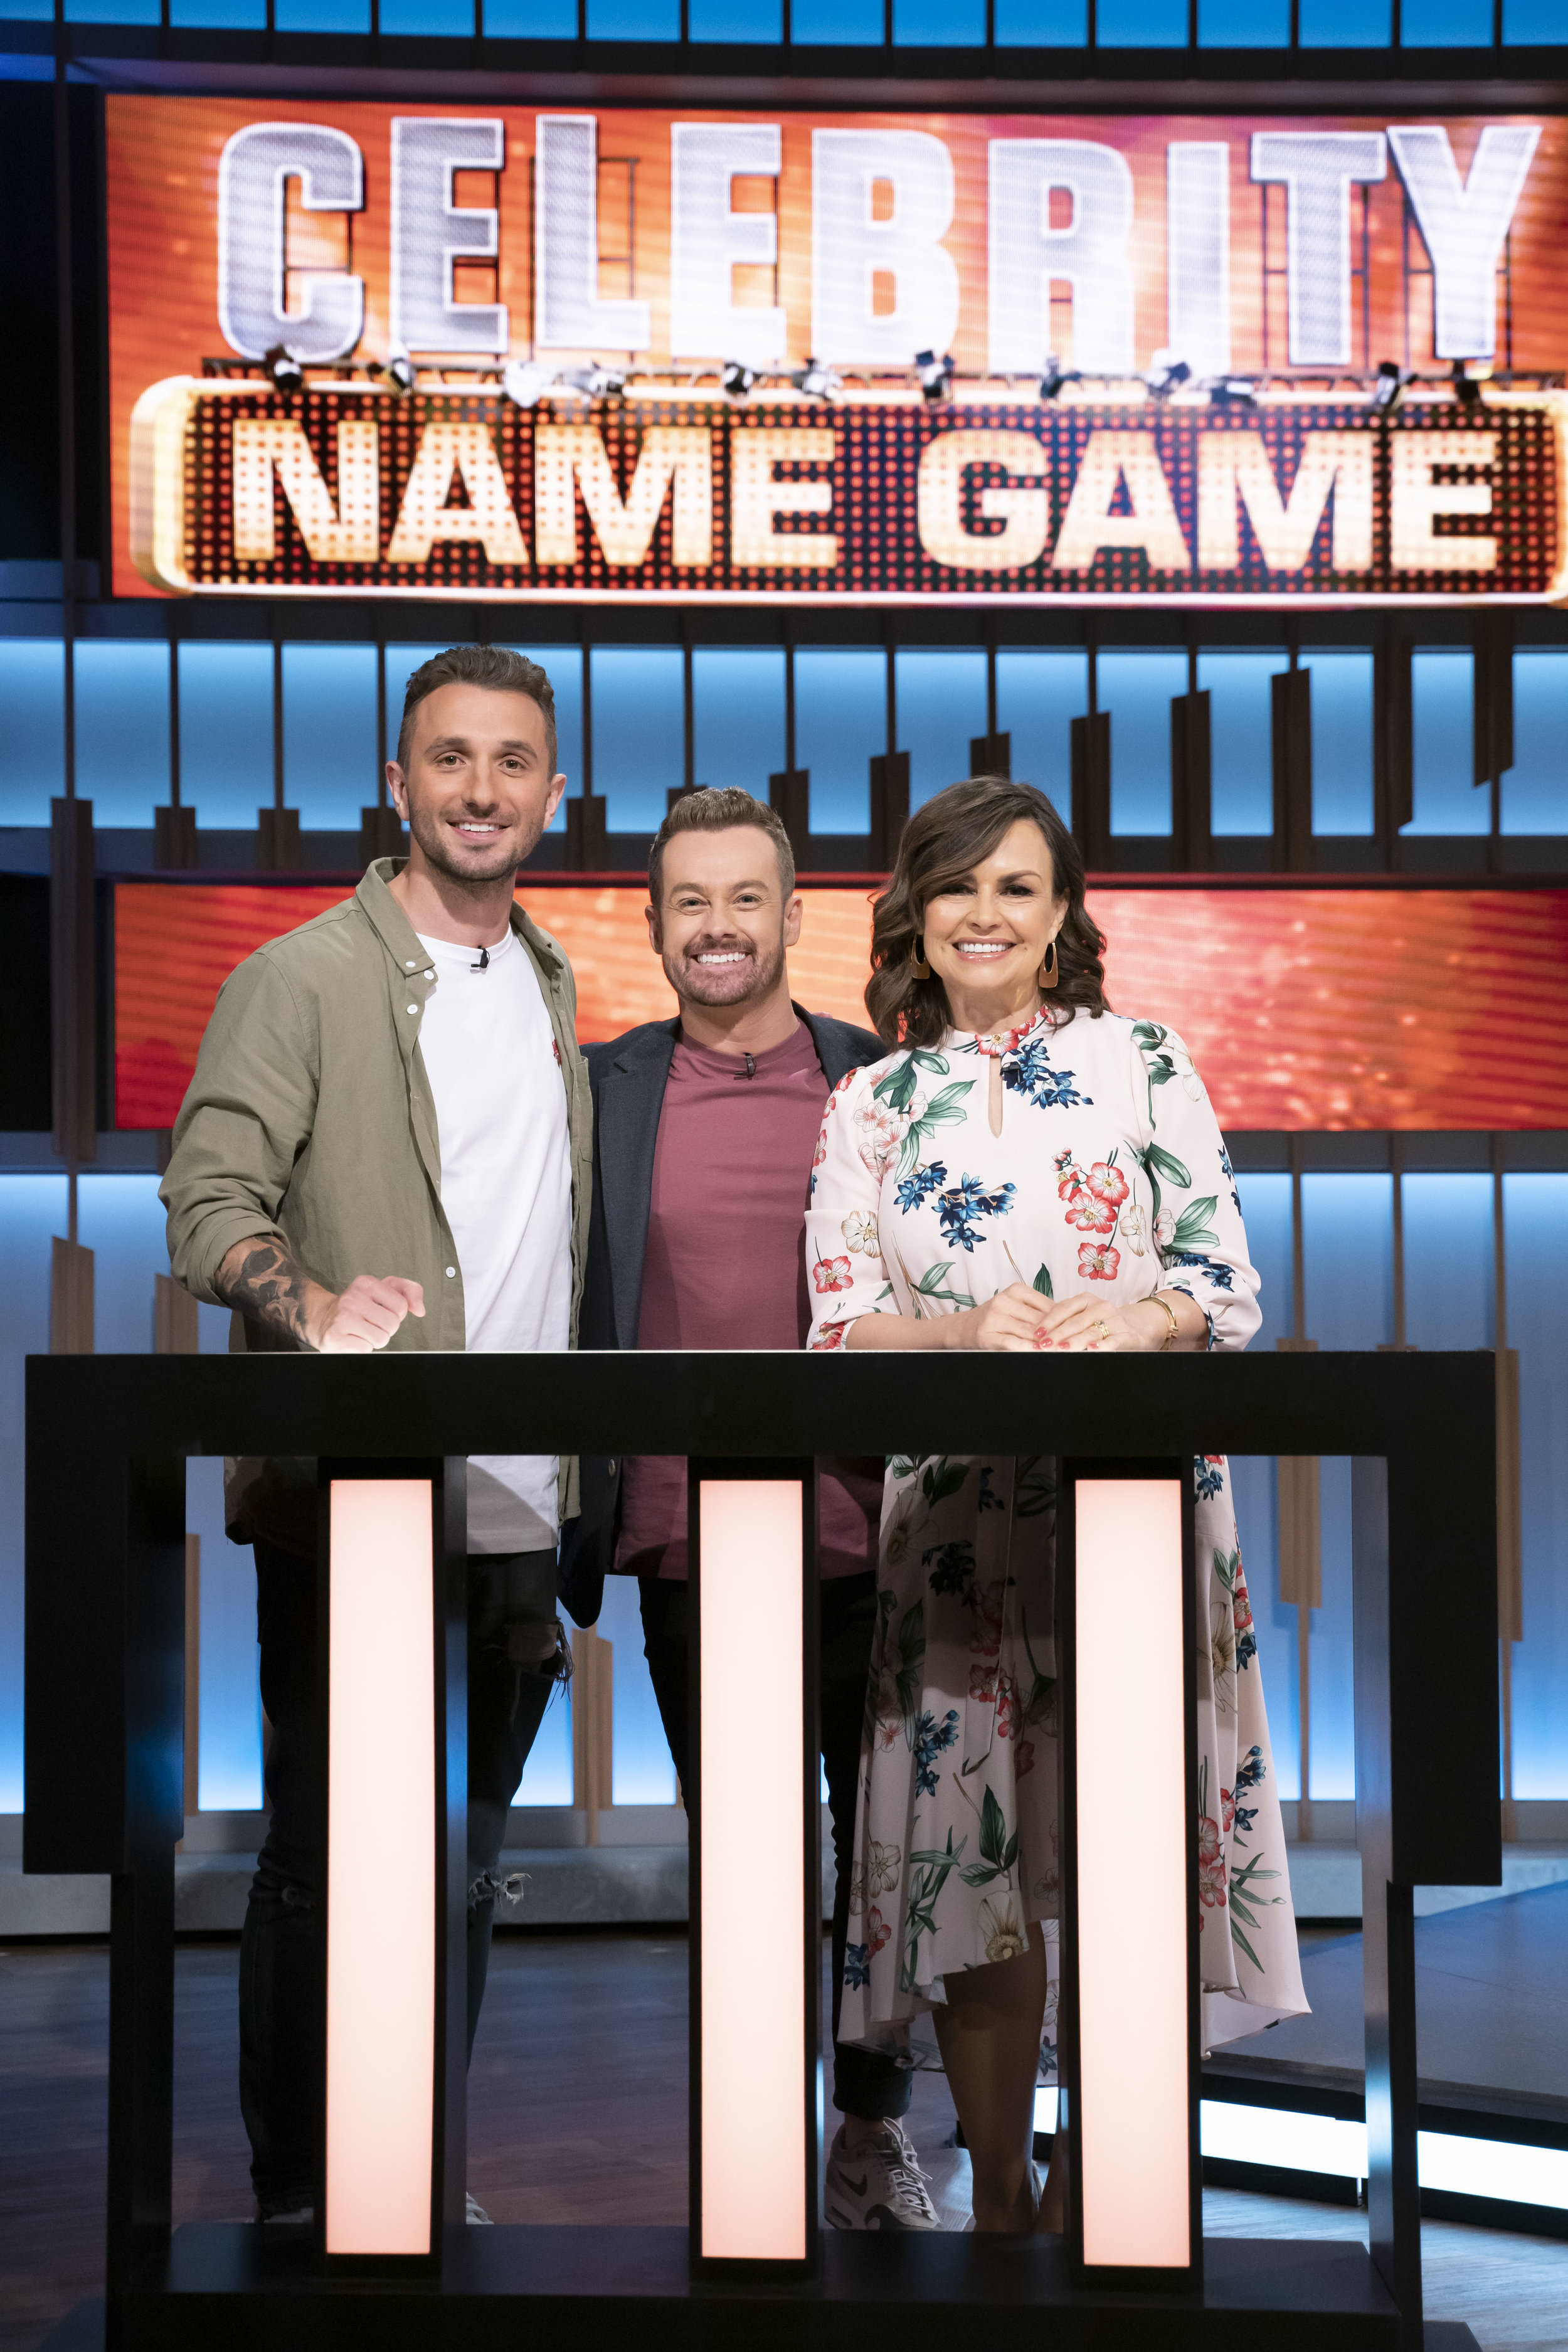   Celebrity Name Game  Source: 10 Network 